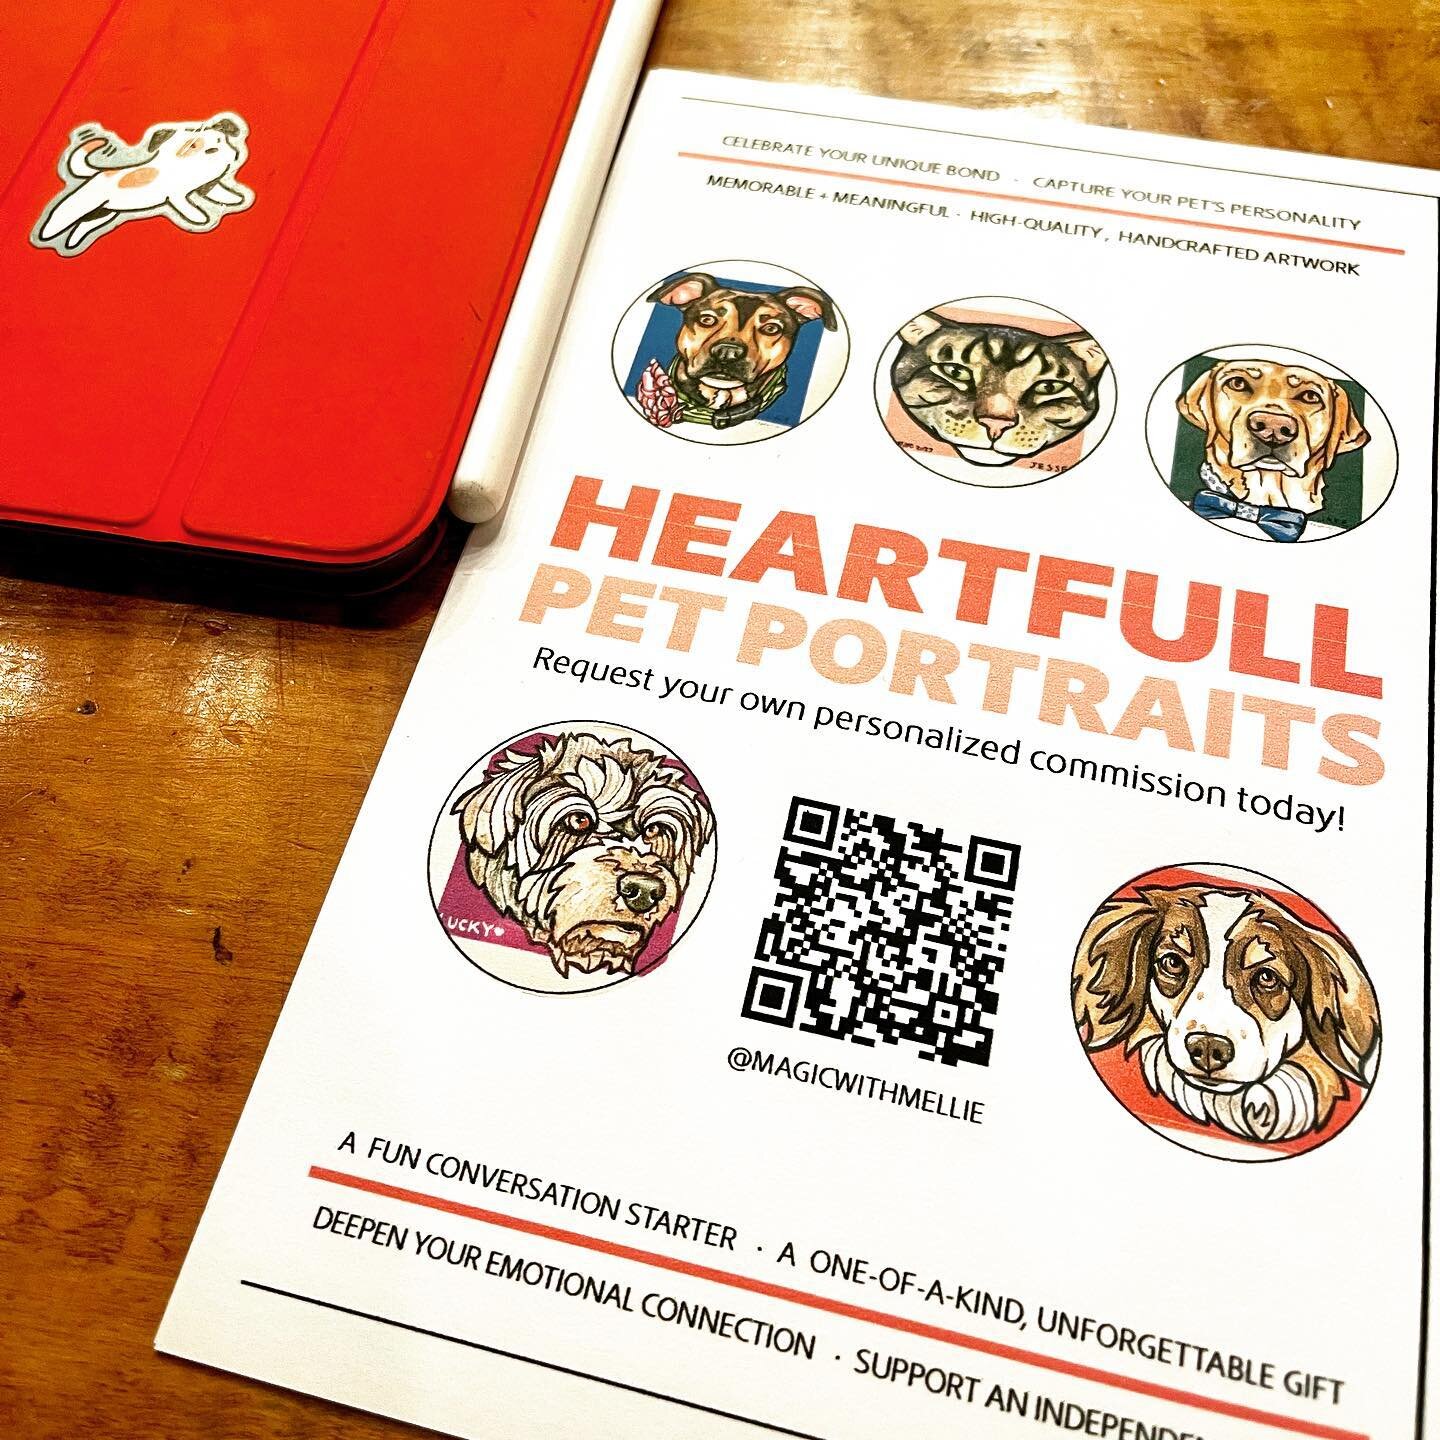 After much encouragement (and actual insistence) from @aquariusnation, I FINALLY finished and and printed some physical flyers for my pet portraits to deliver around town. If I&rsquo;m honest, a few local pet portrait clients nudged me, as well. Funn